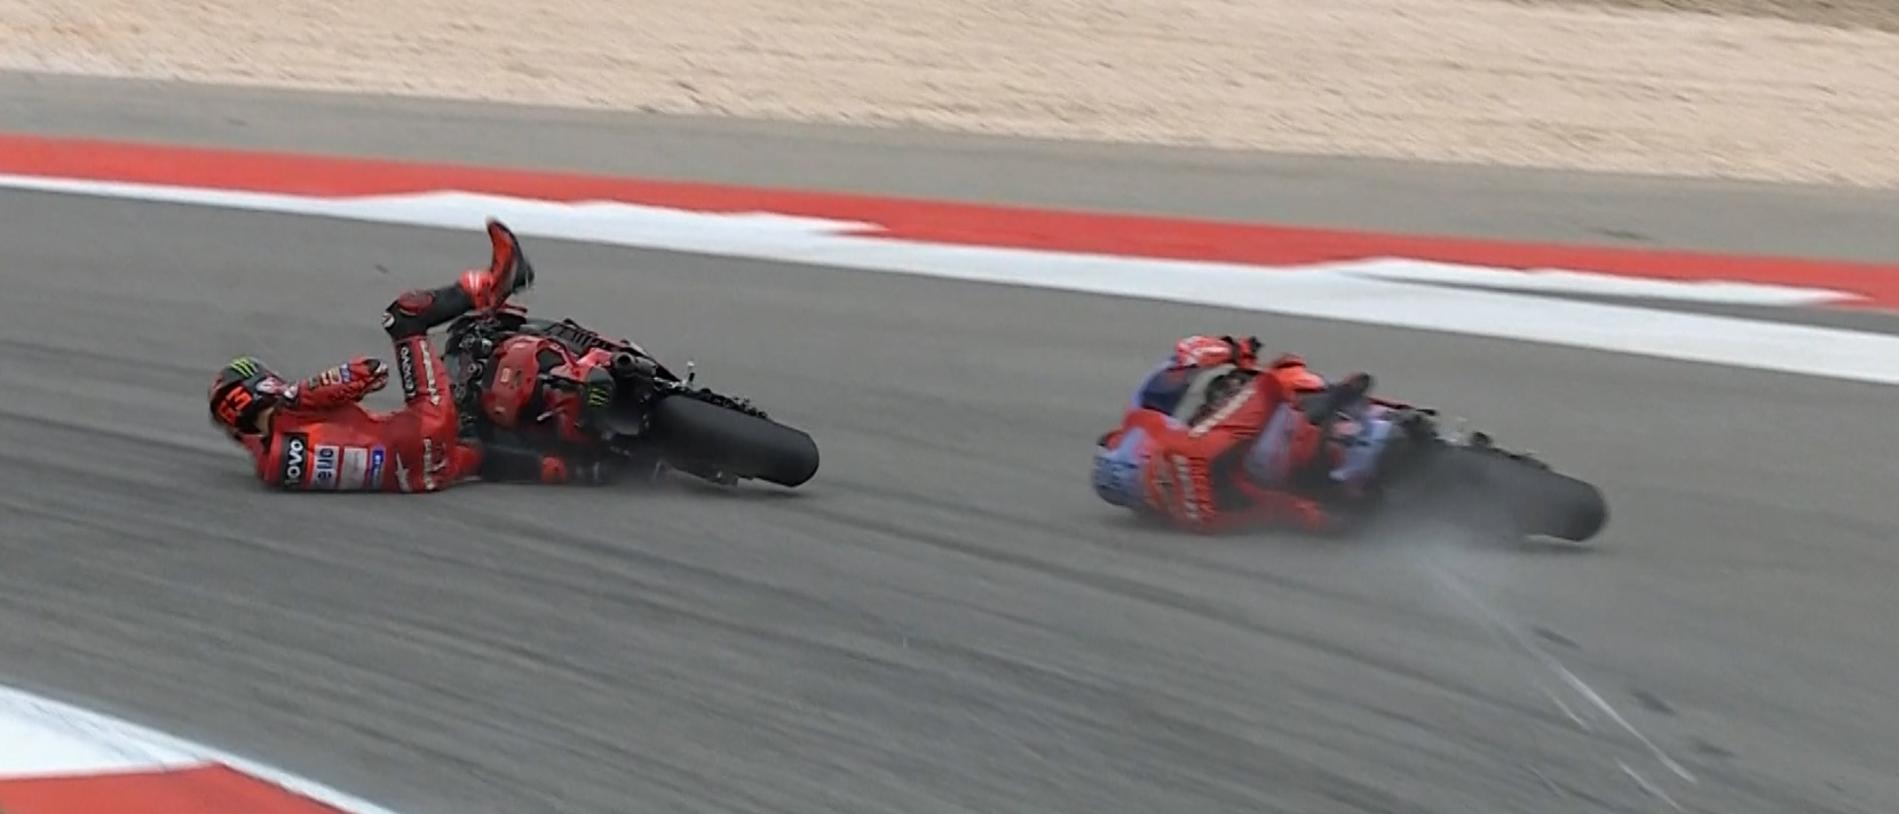 A wild crash forced last year's MotoGP winner out of the Portuguese Grand Prix. Picture: Supplied